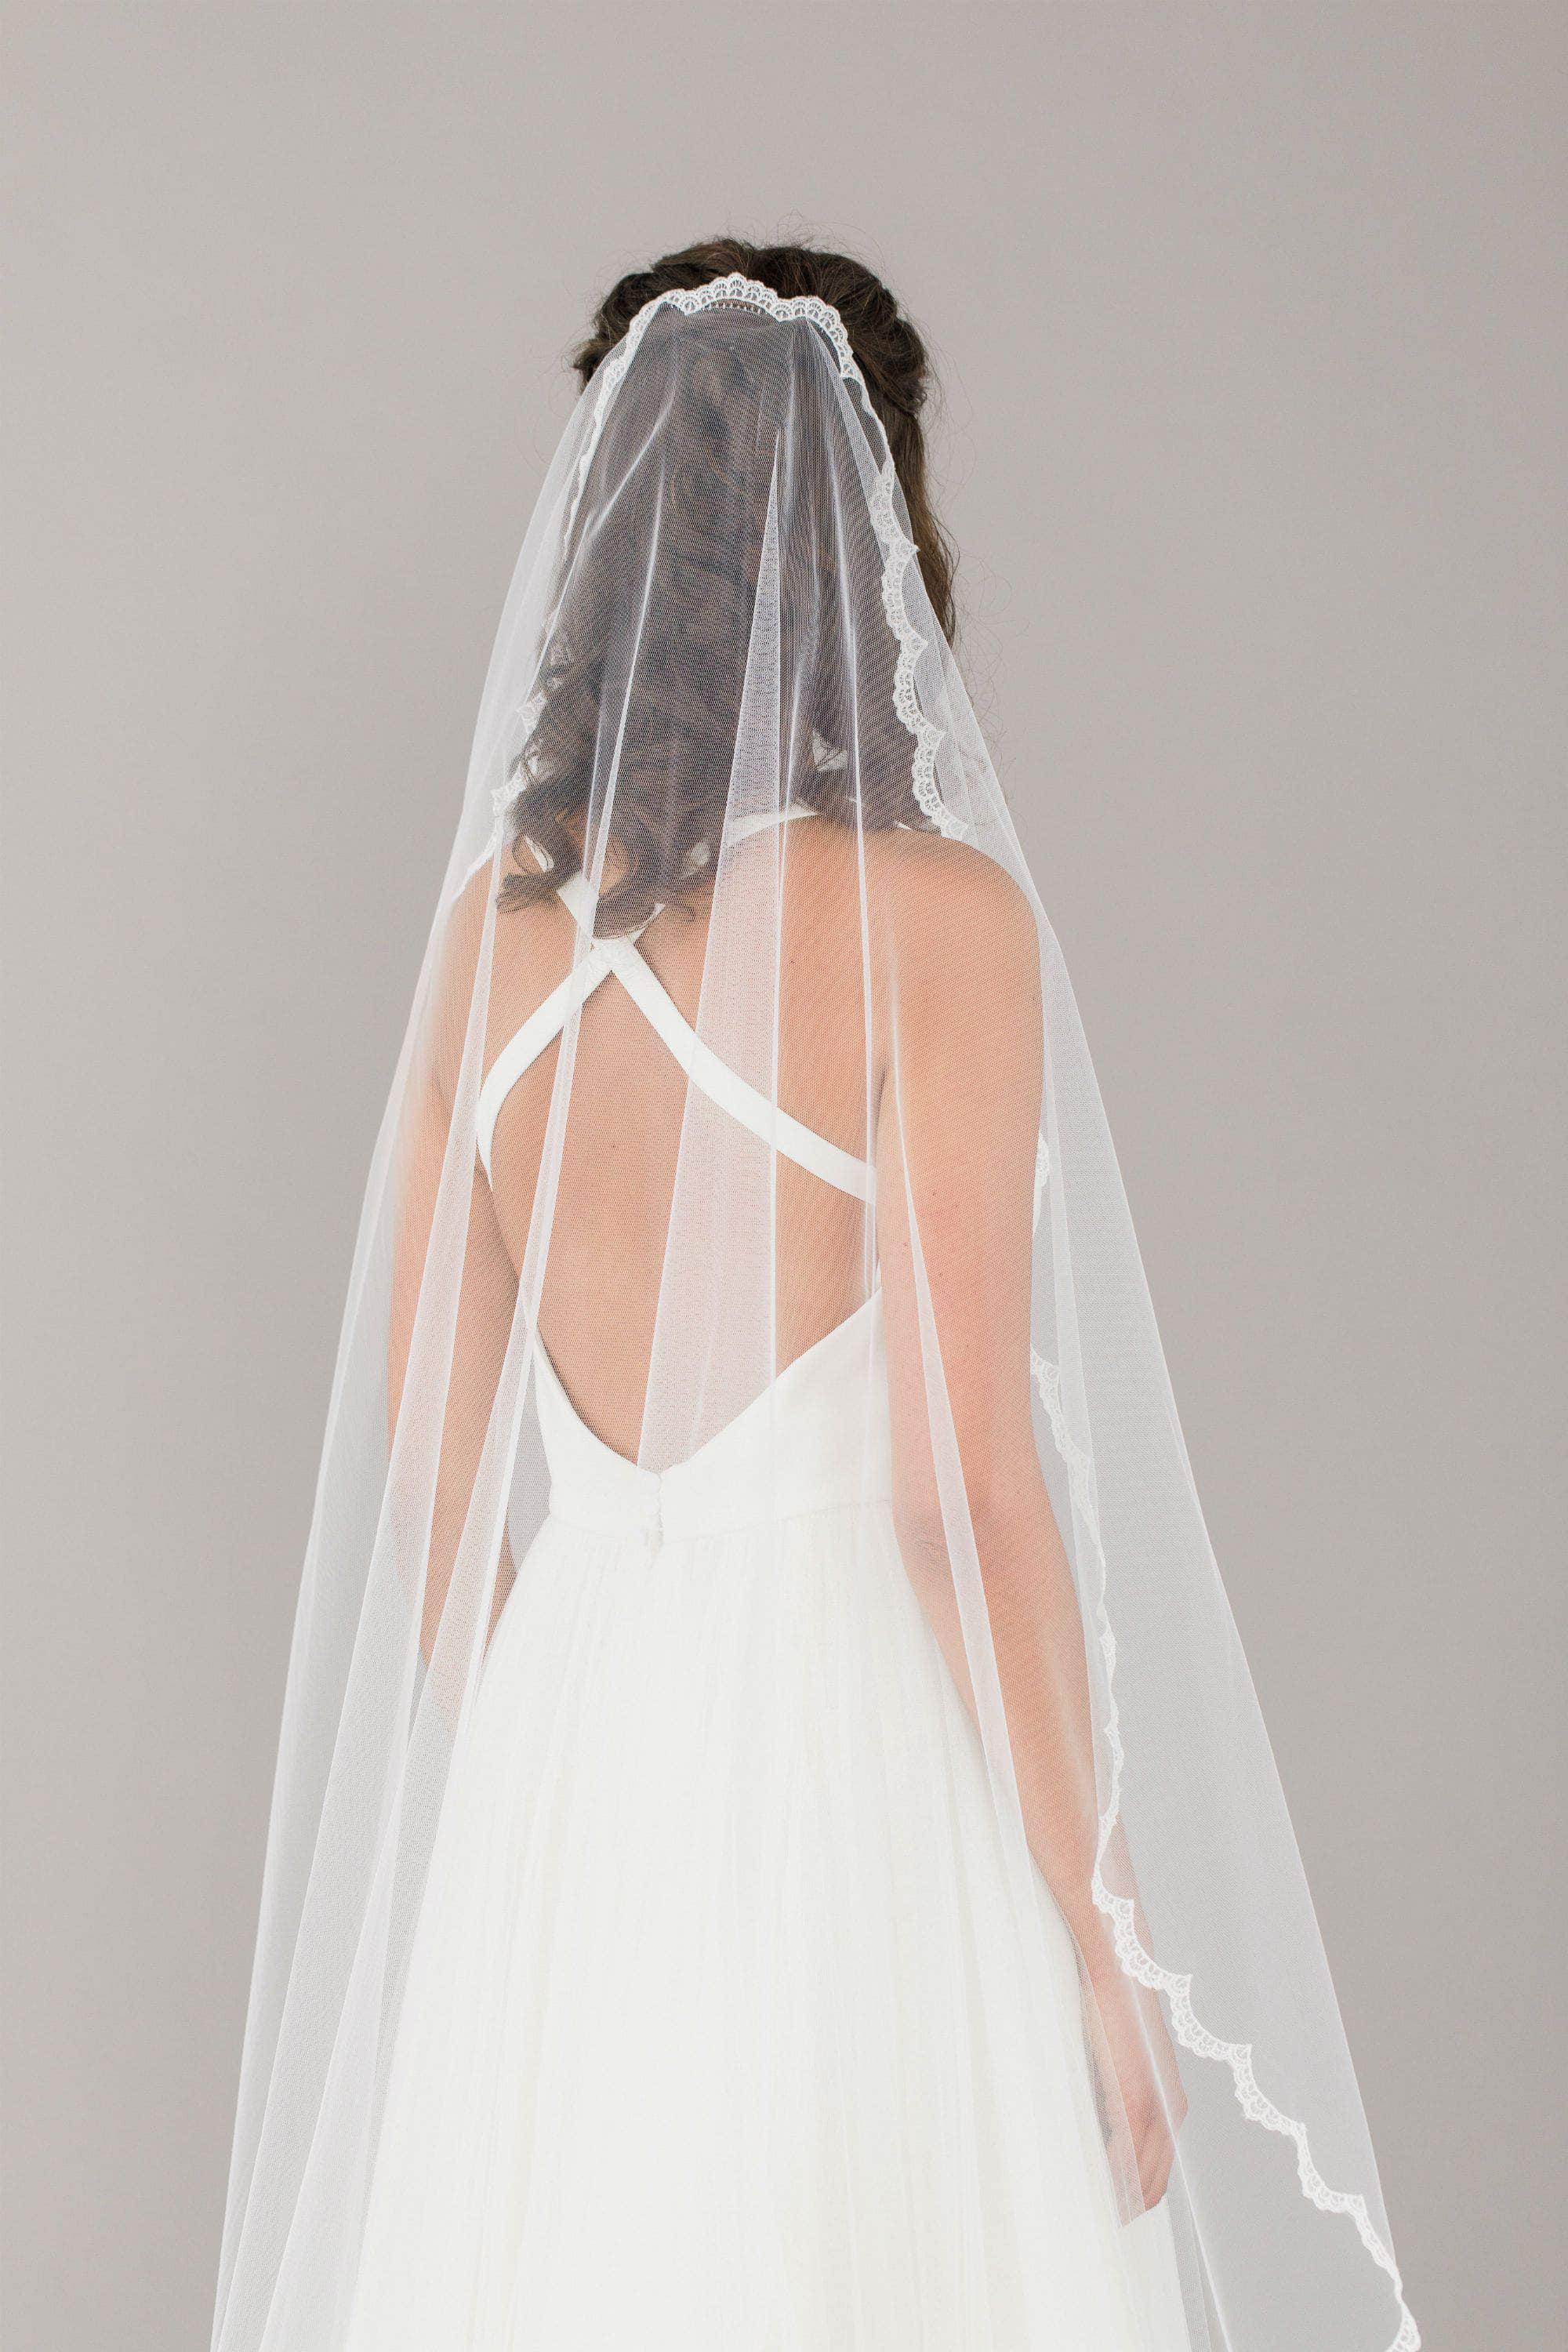 Wedding Veil Full lace edged barely there wedding veil - 'Adeline'